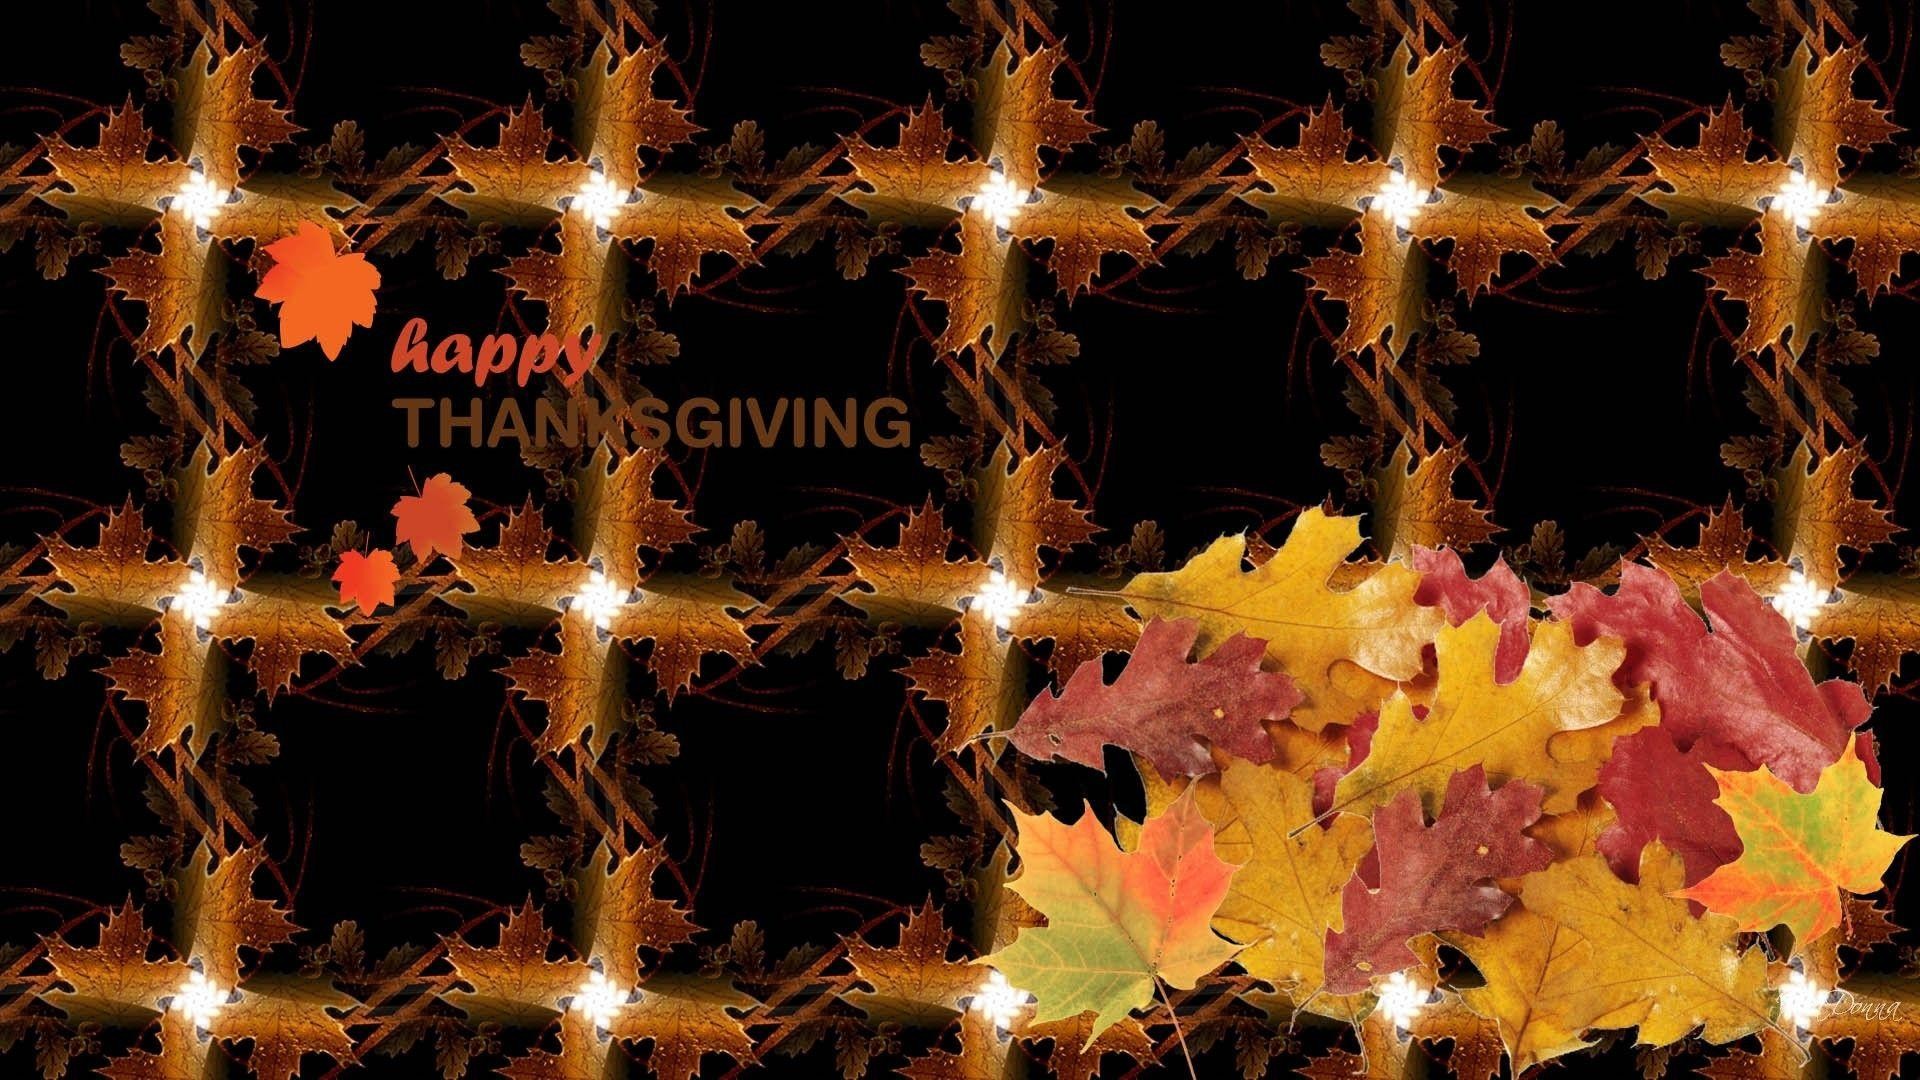 Happy Thanksgiving HD Wallpapers